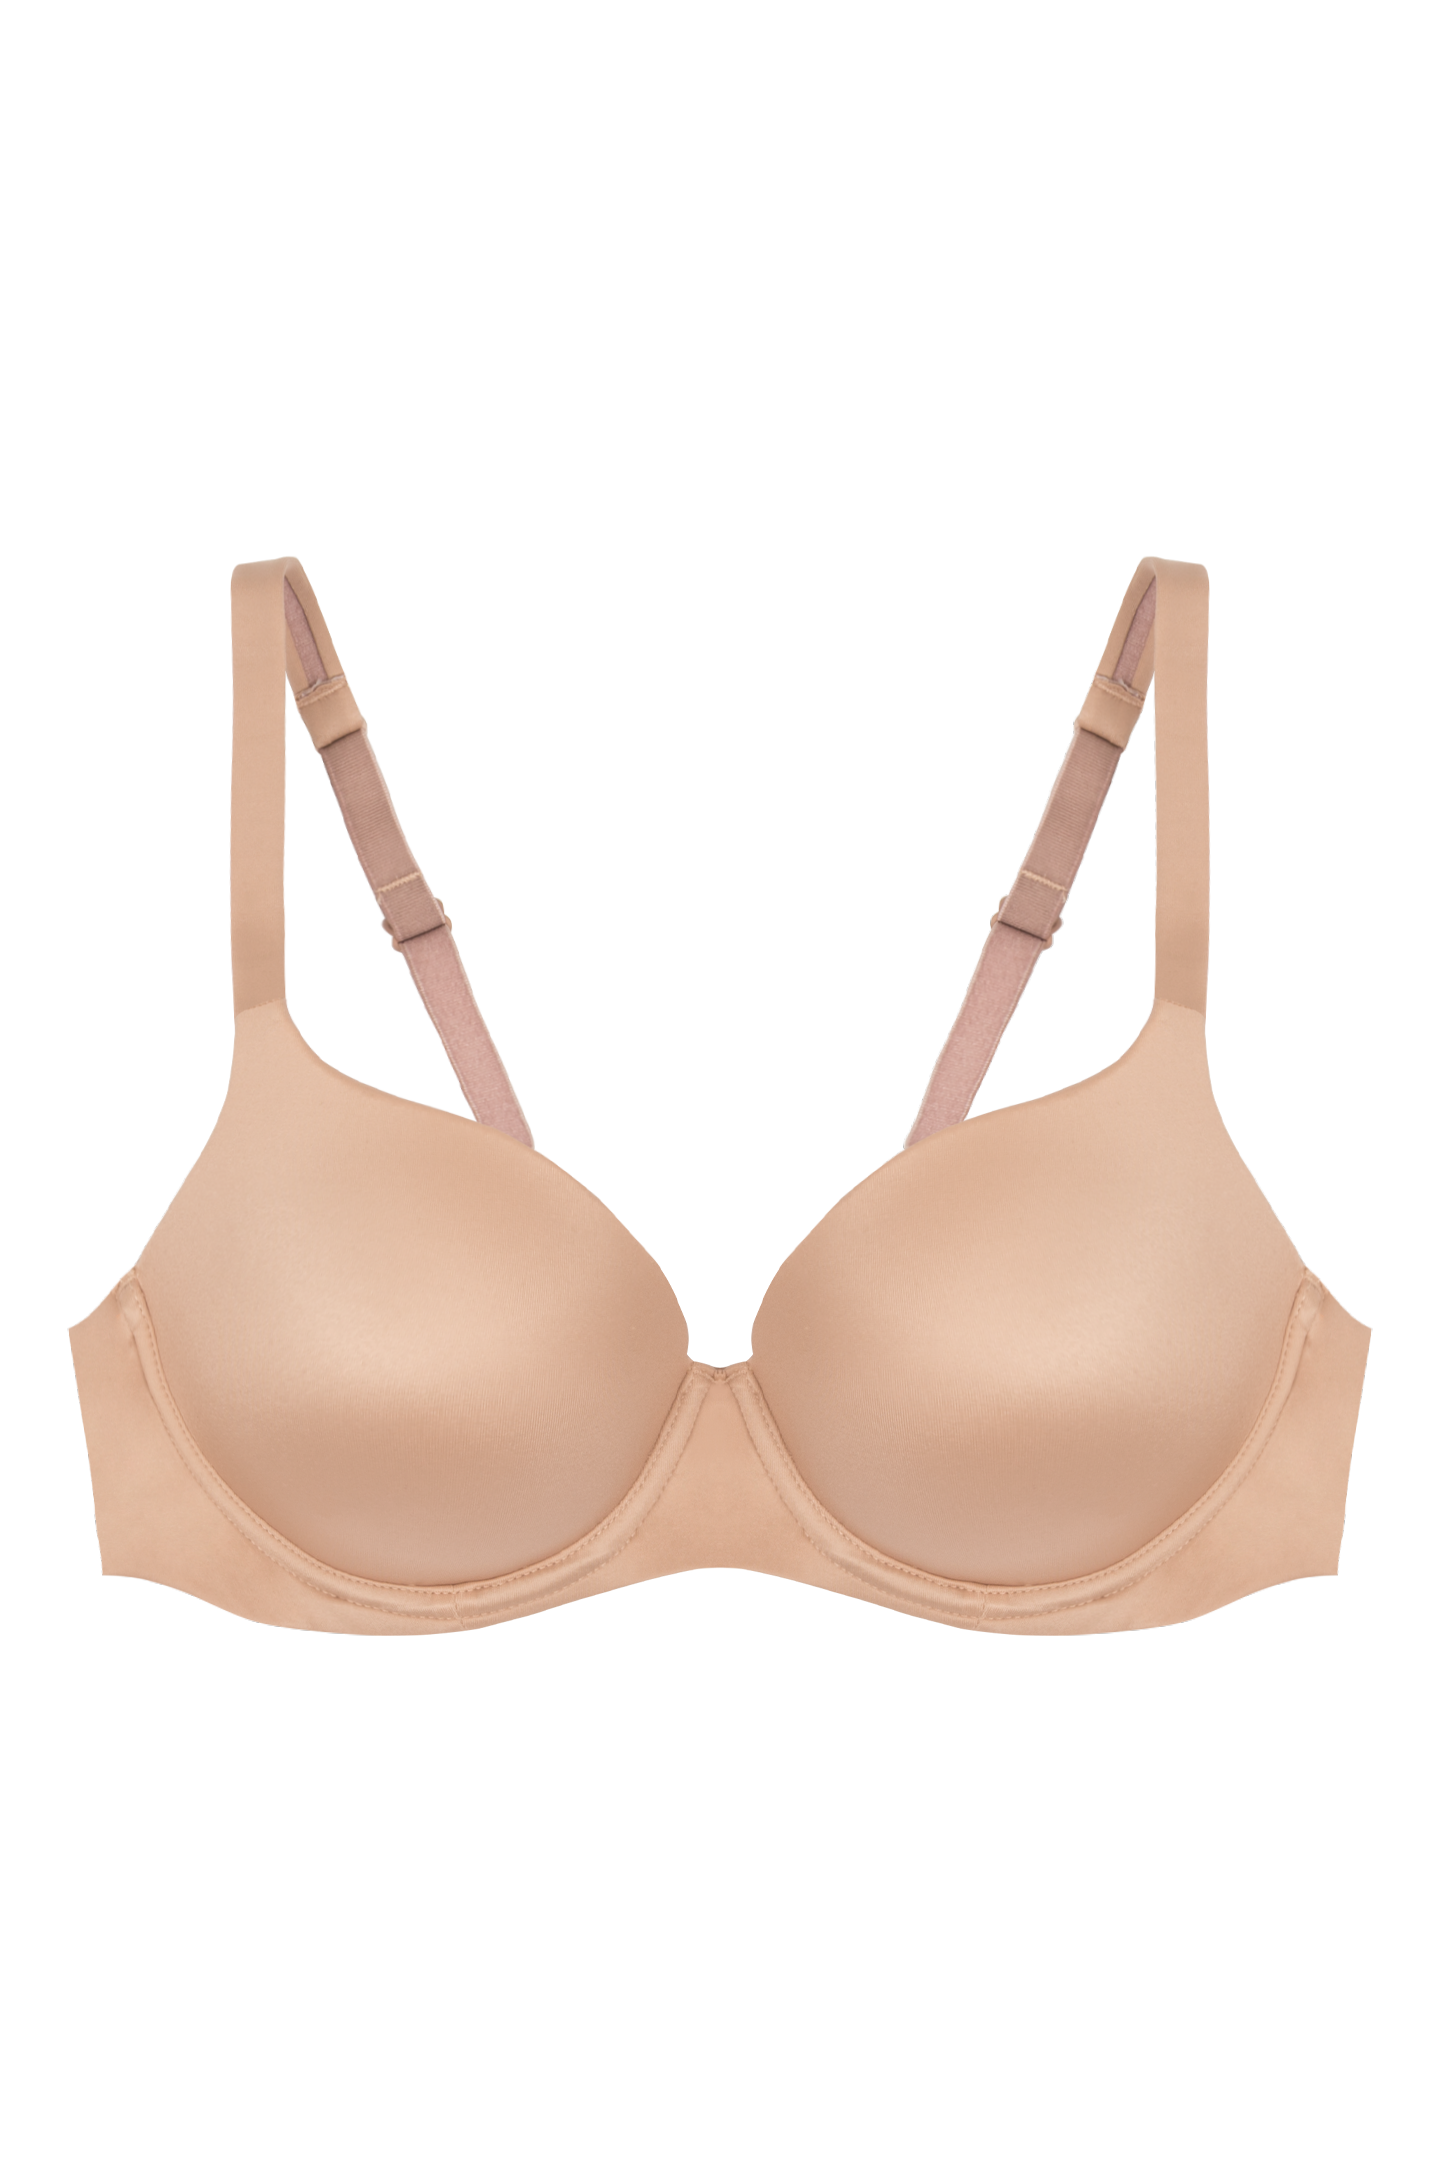 Buy SMOOTH PUSH UP BRA online at Intimo